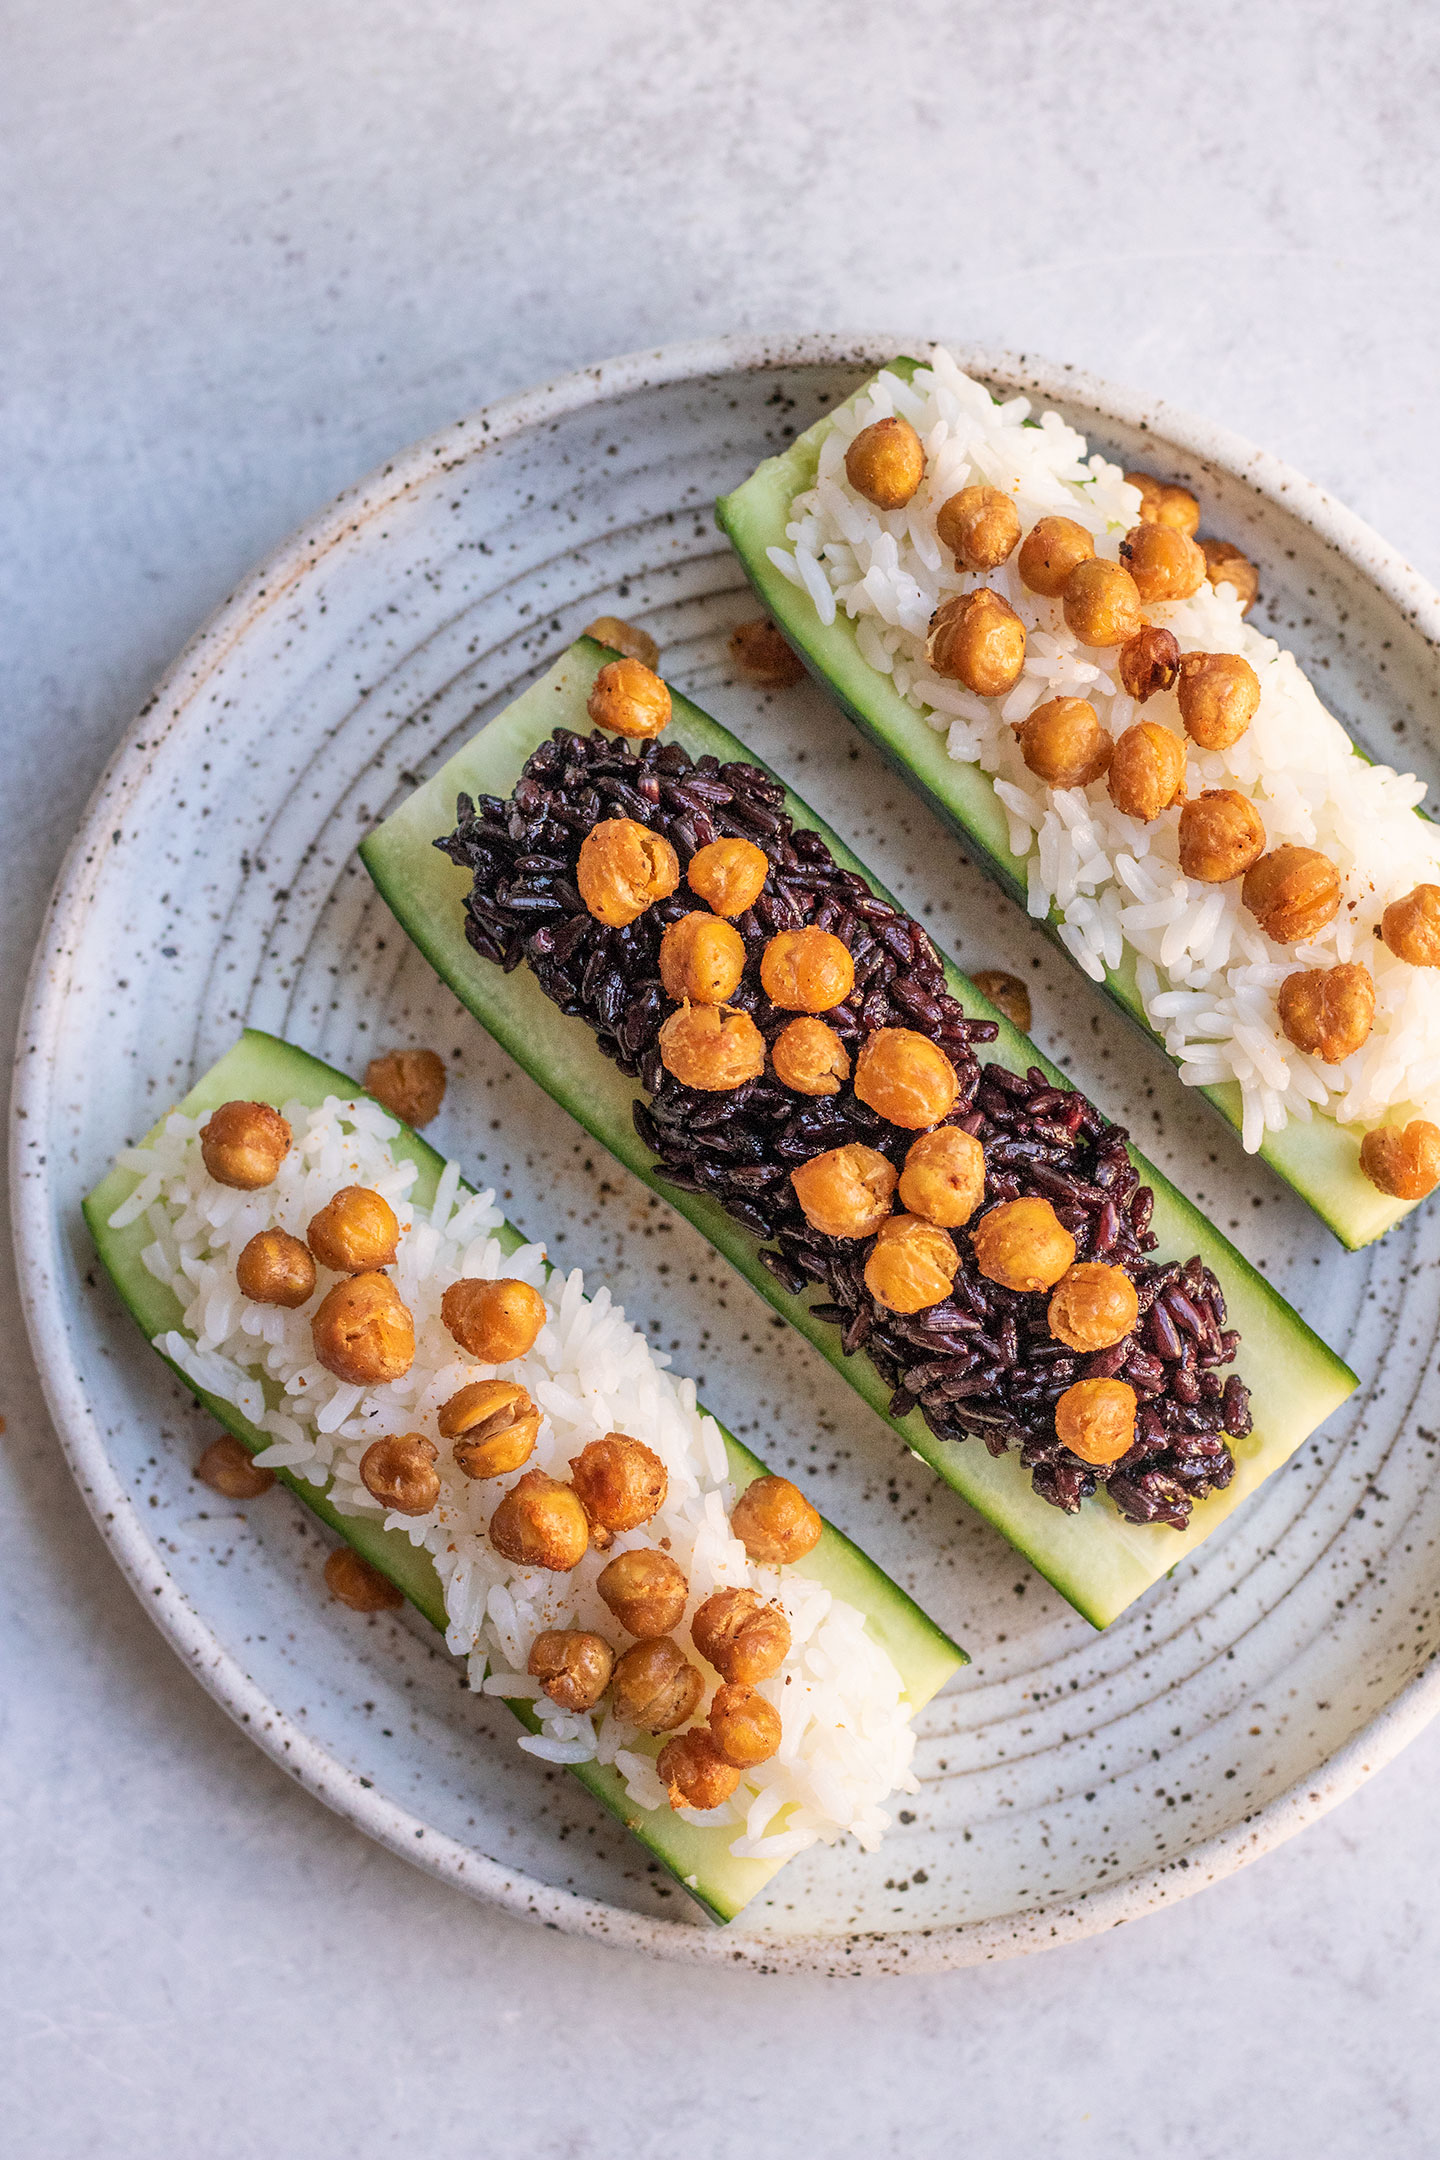 Plate with 3 rice stuffed cucumber boats topped with roasted chickpeas.